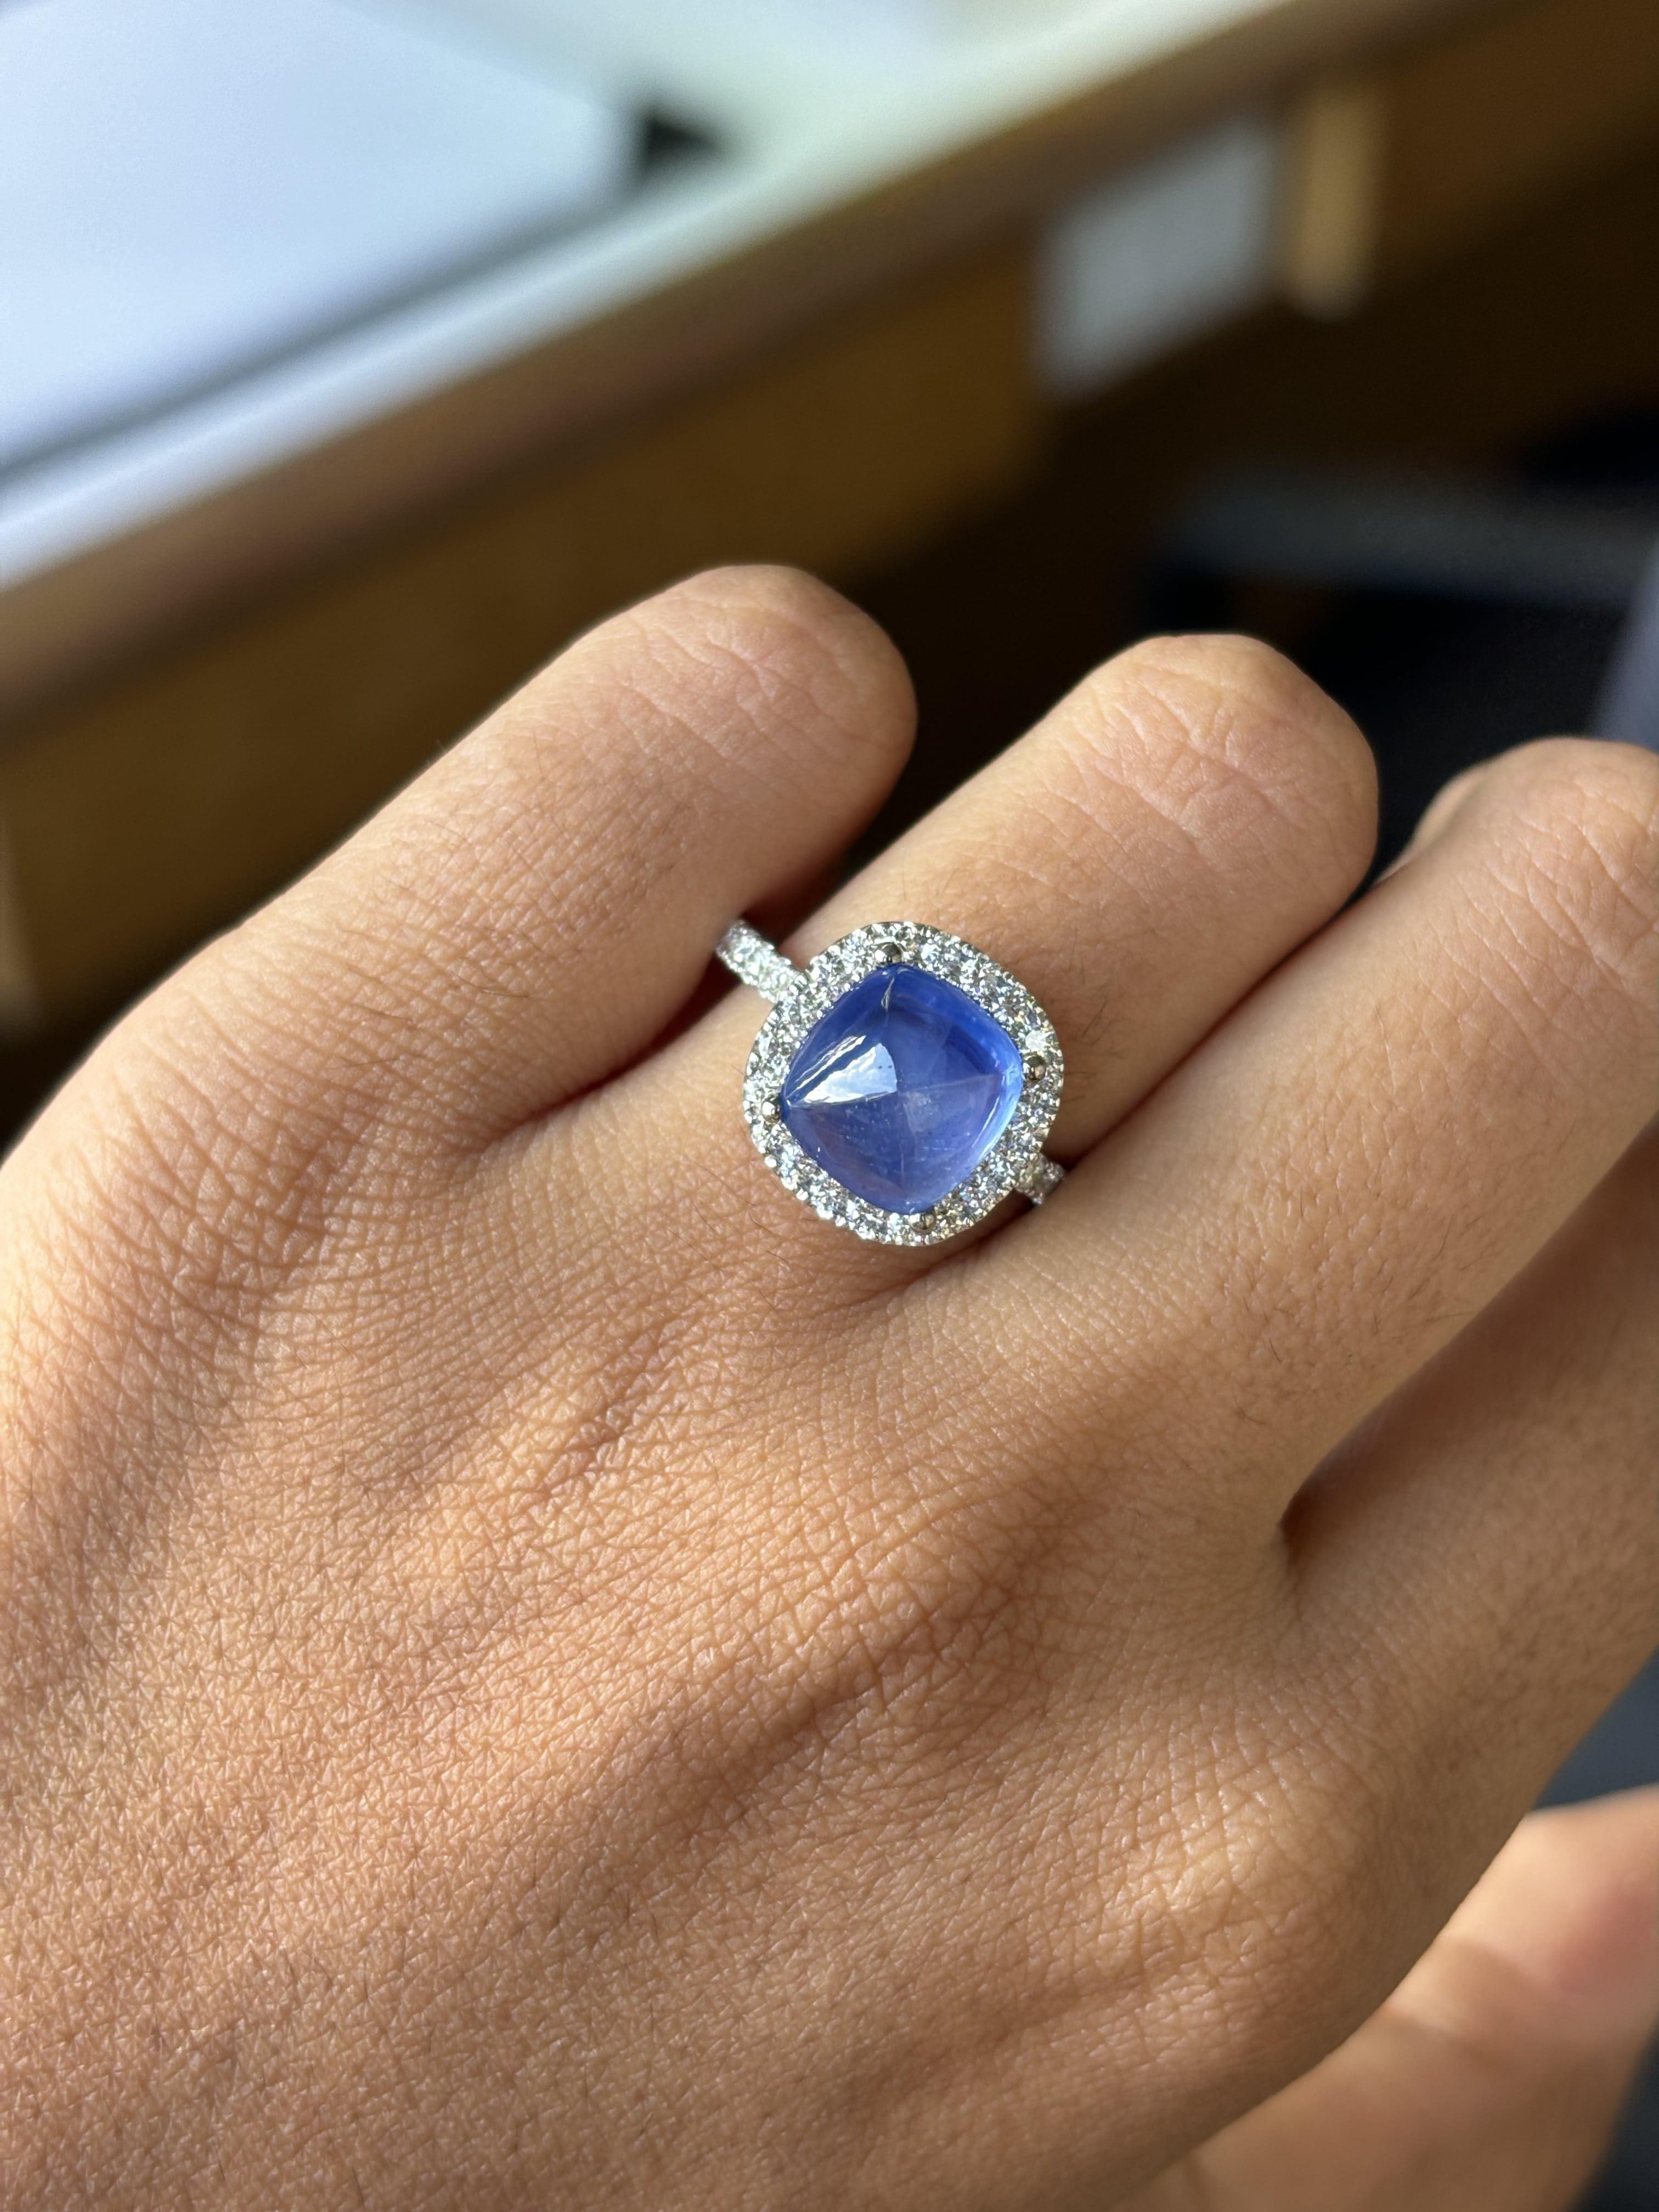 4.23 Carat Sugarloaf Ceylon Sapphire Ring with Halo Diamonds in 14K White Gold For Sale 1